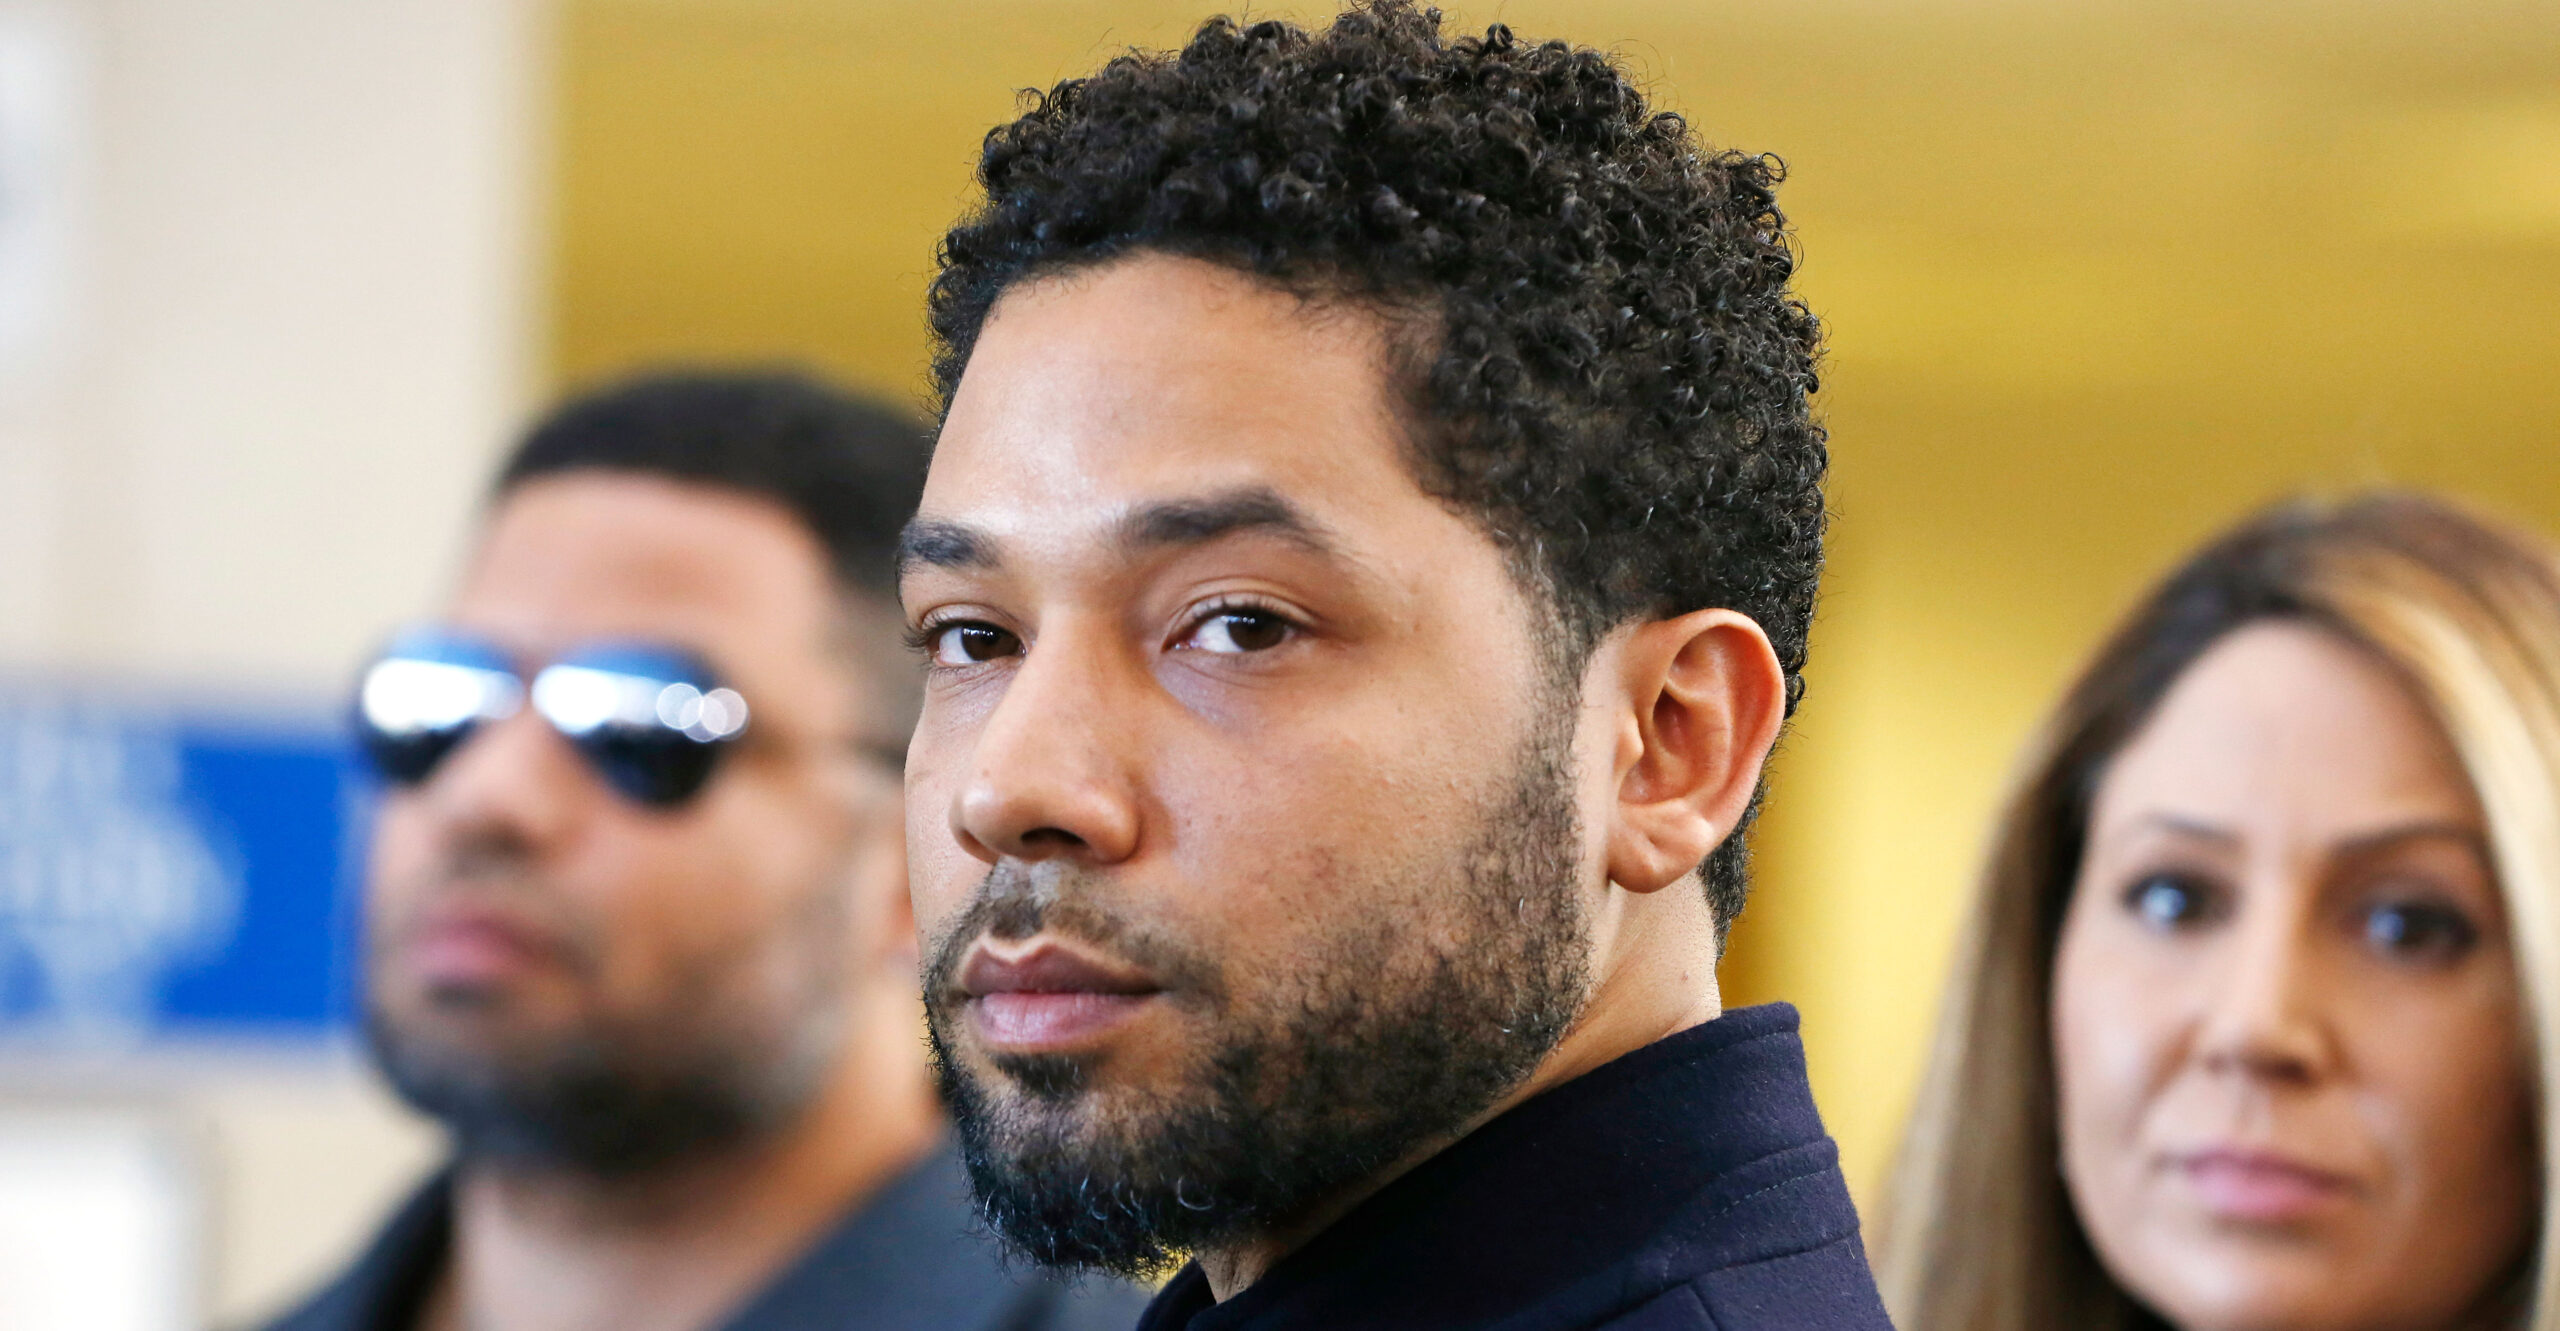 Jail for Jussie: Throw Book at Race-Hoaxster Smollett